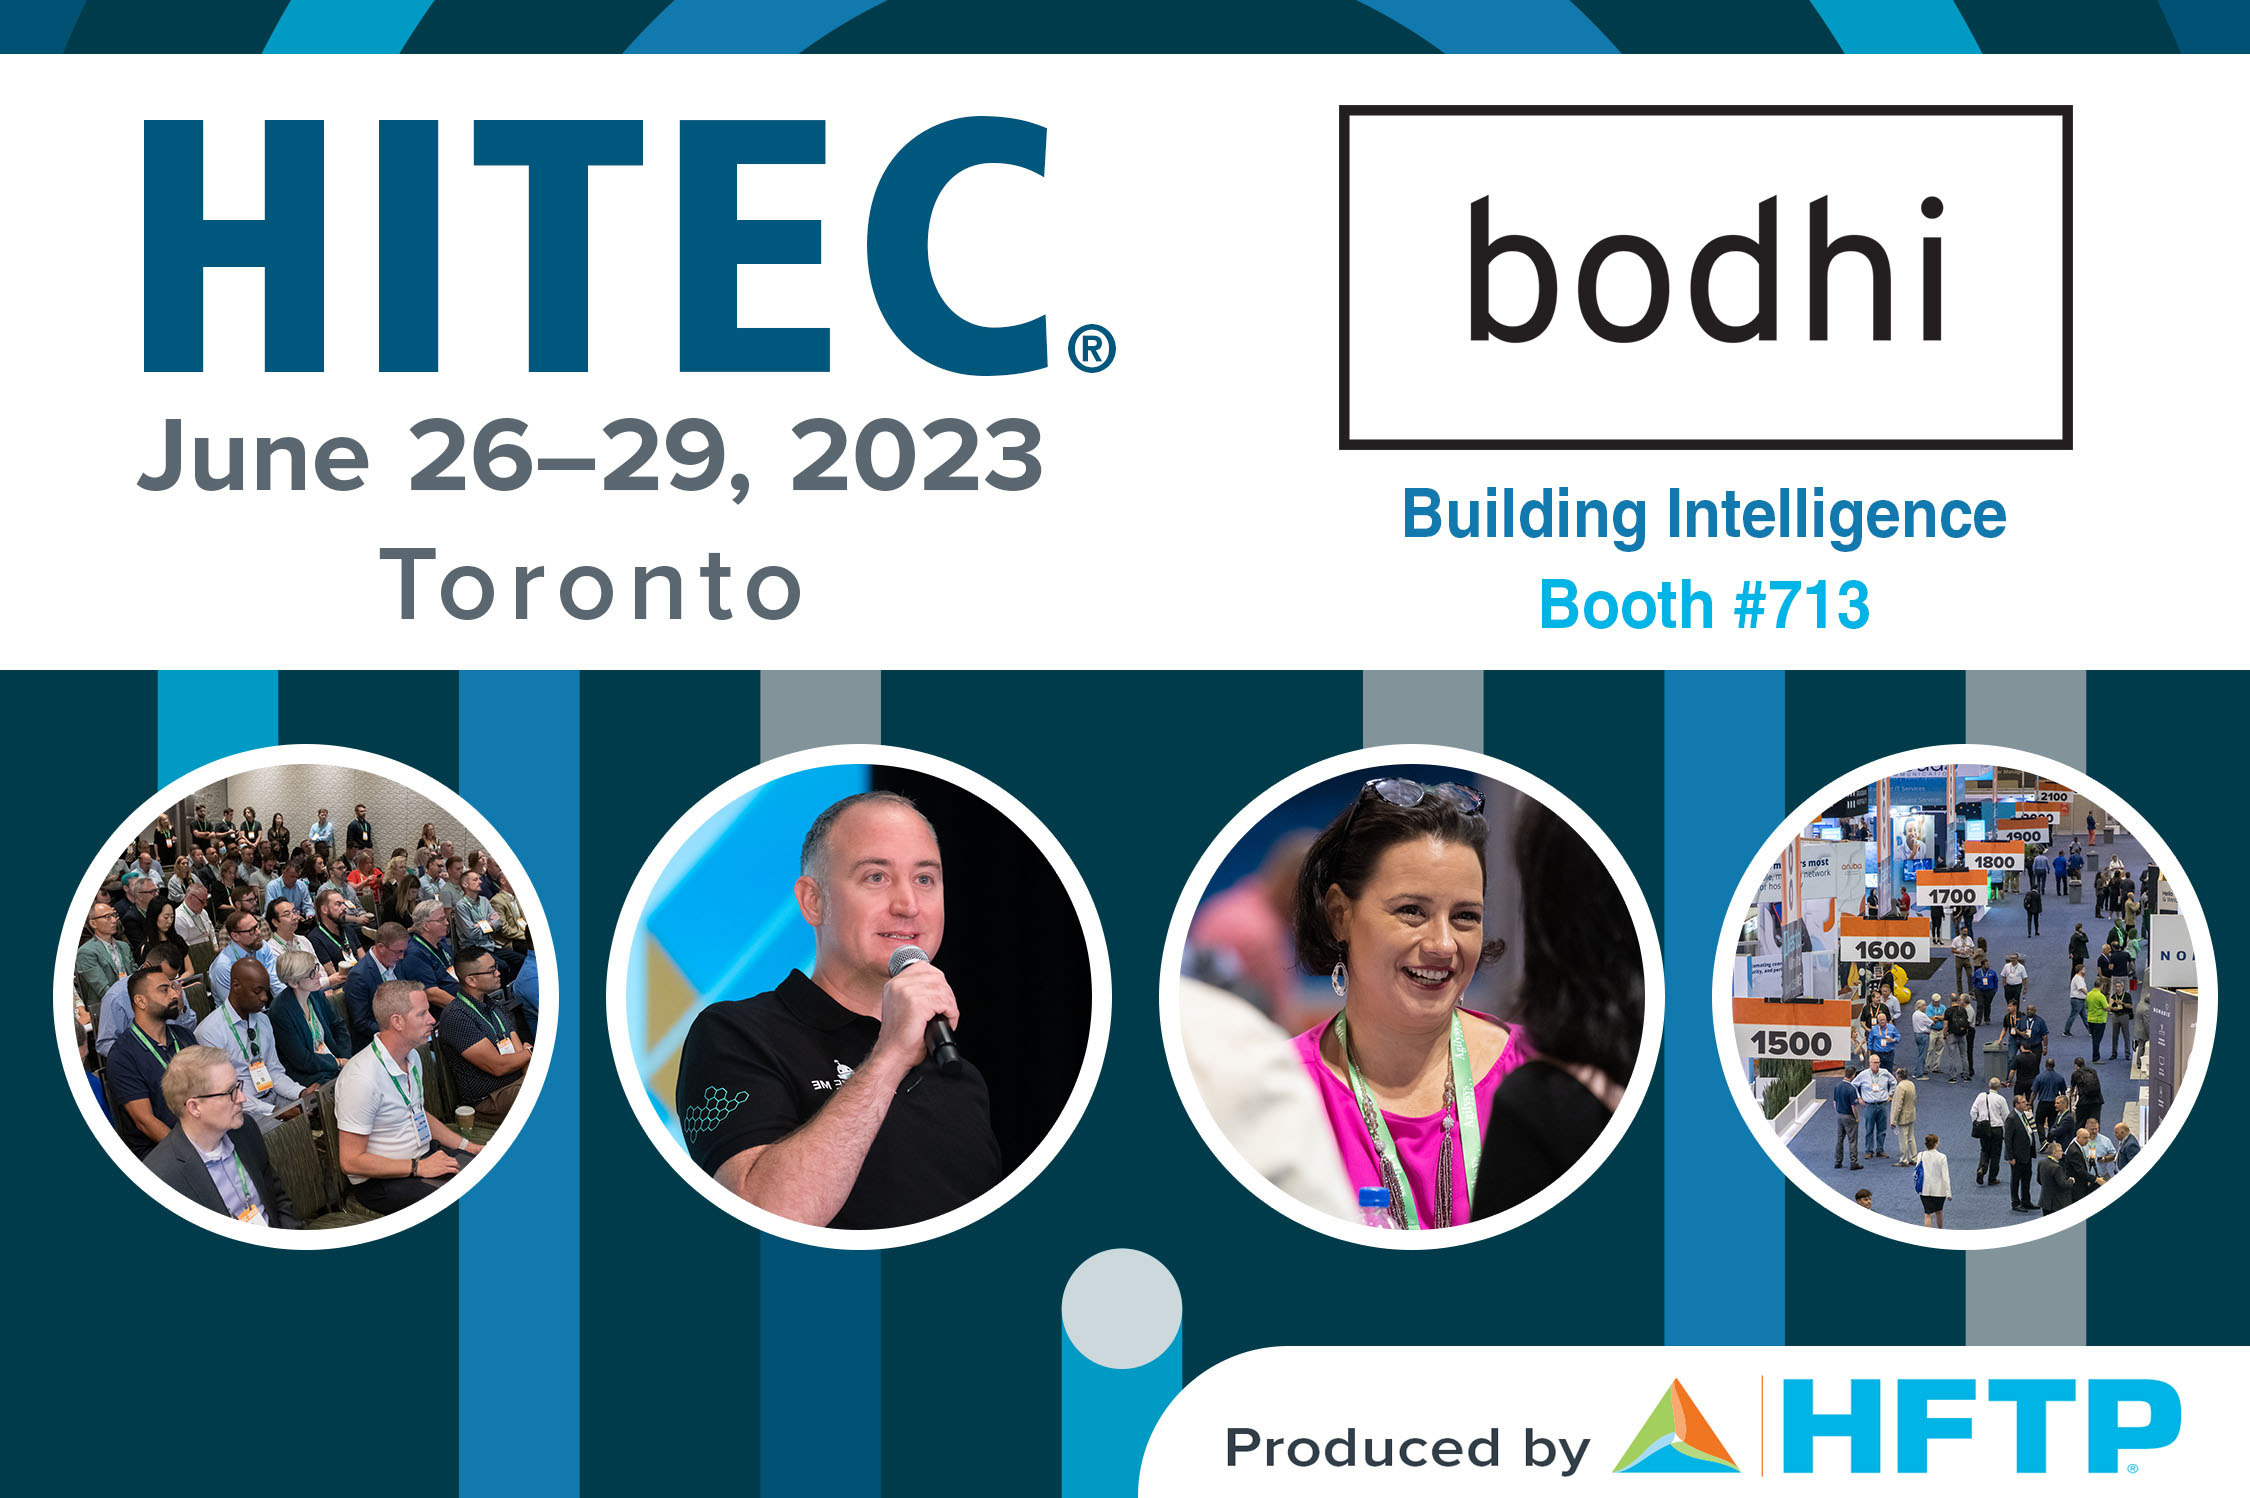 See Bodhi at HITEC Toronto June 26 – 29, for energy savings AND happier guests! Booth 713.